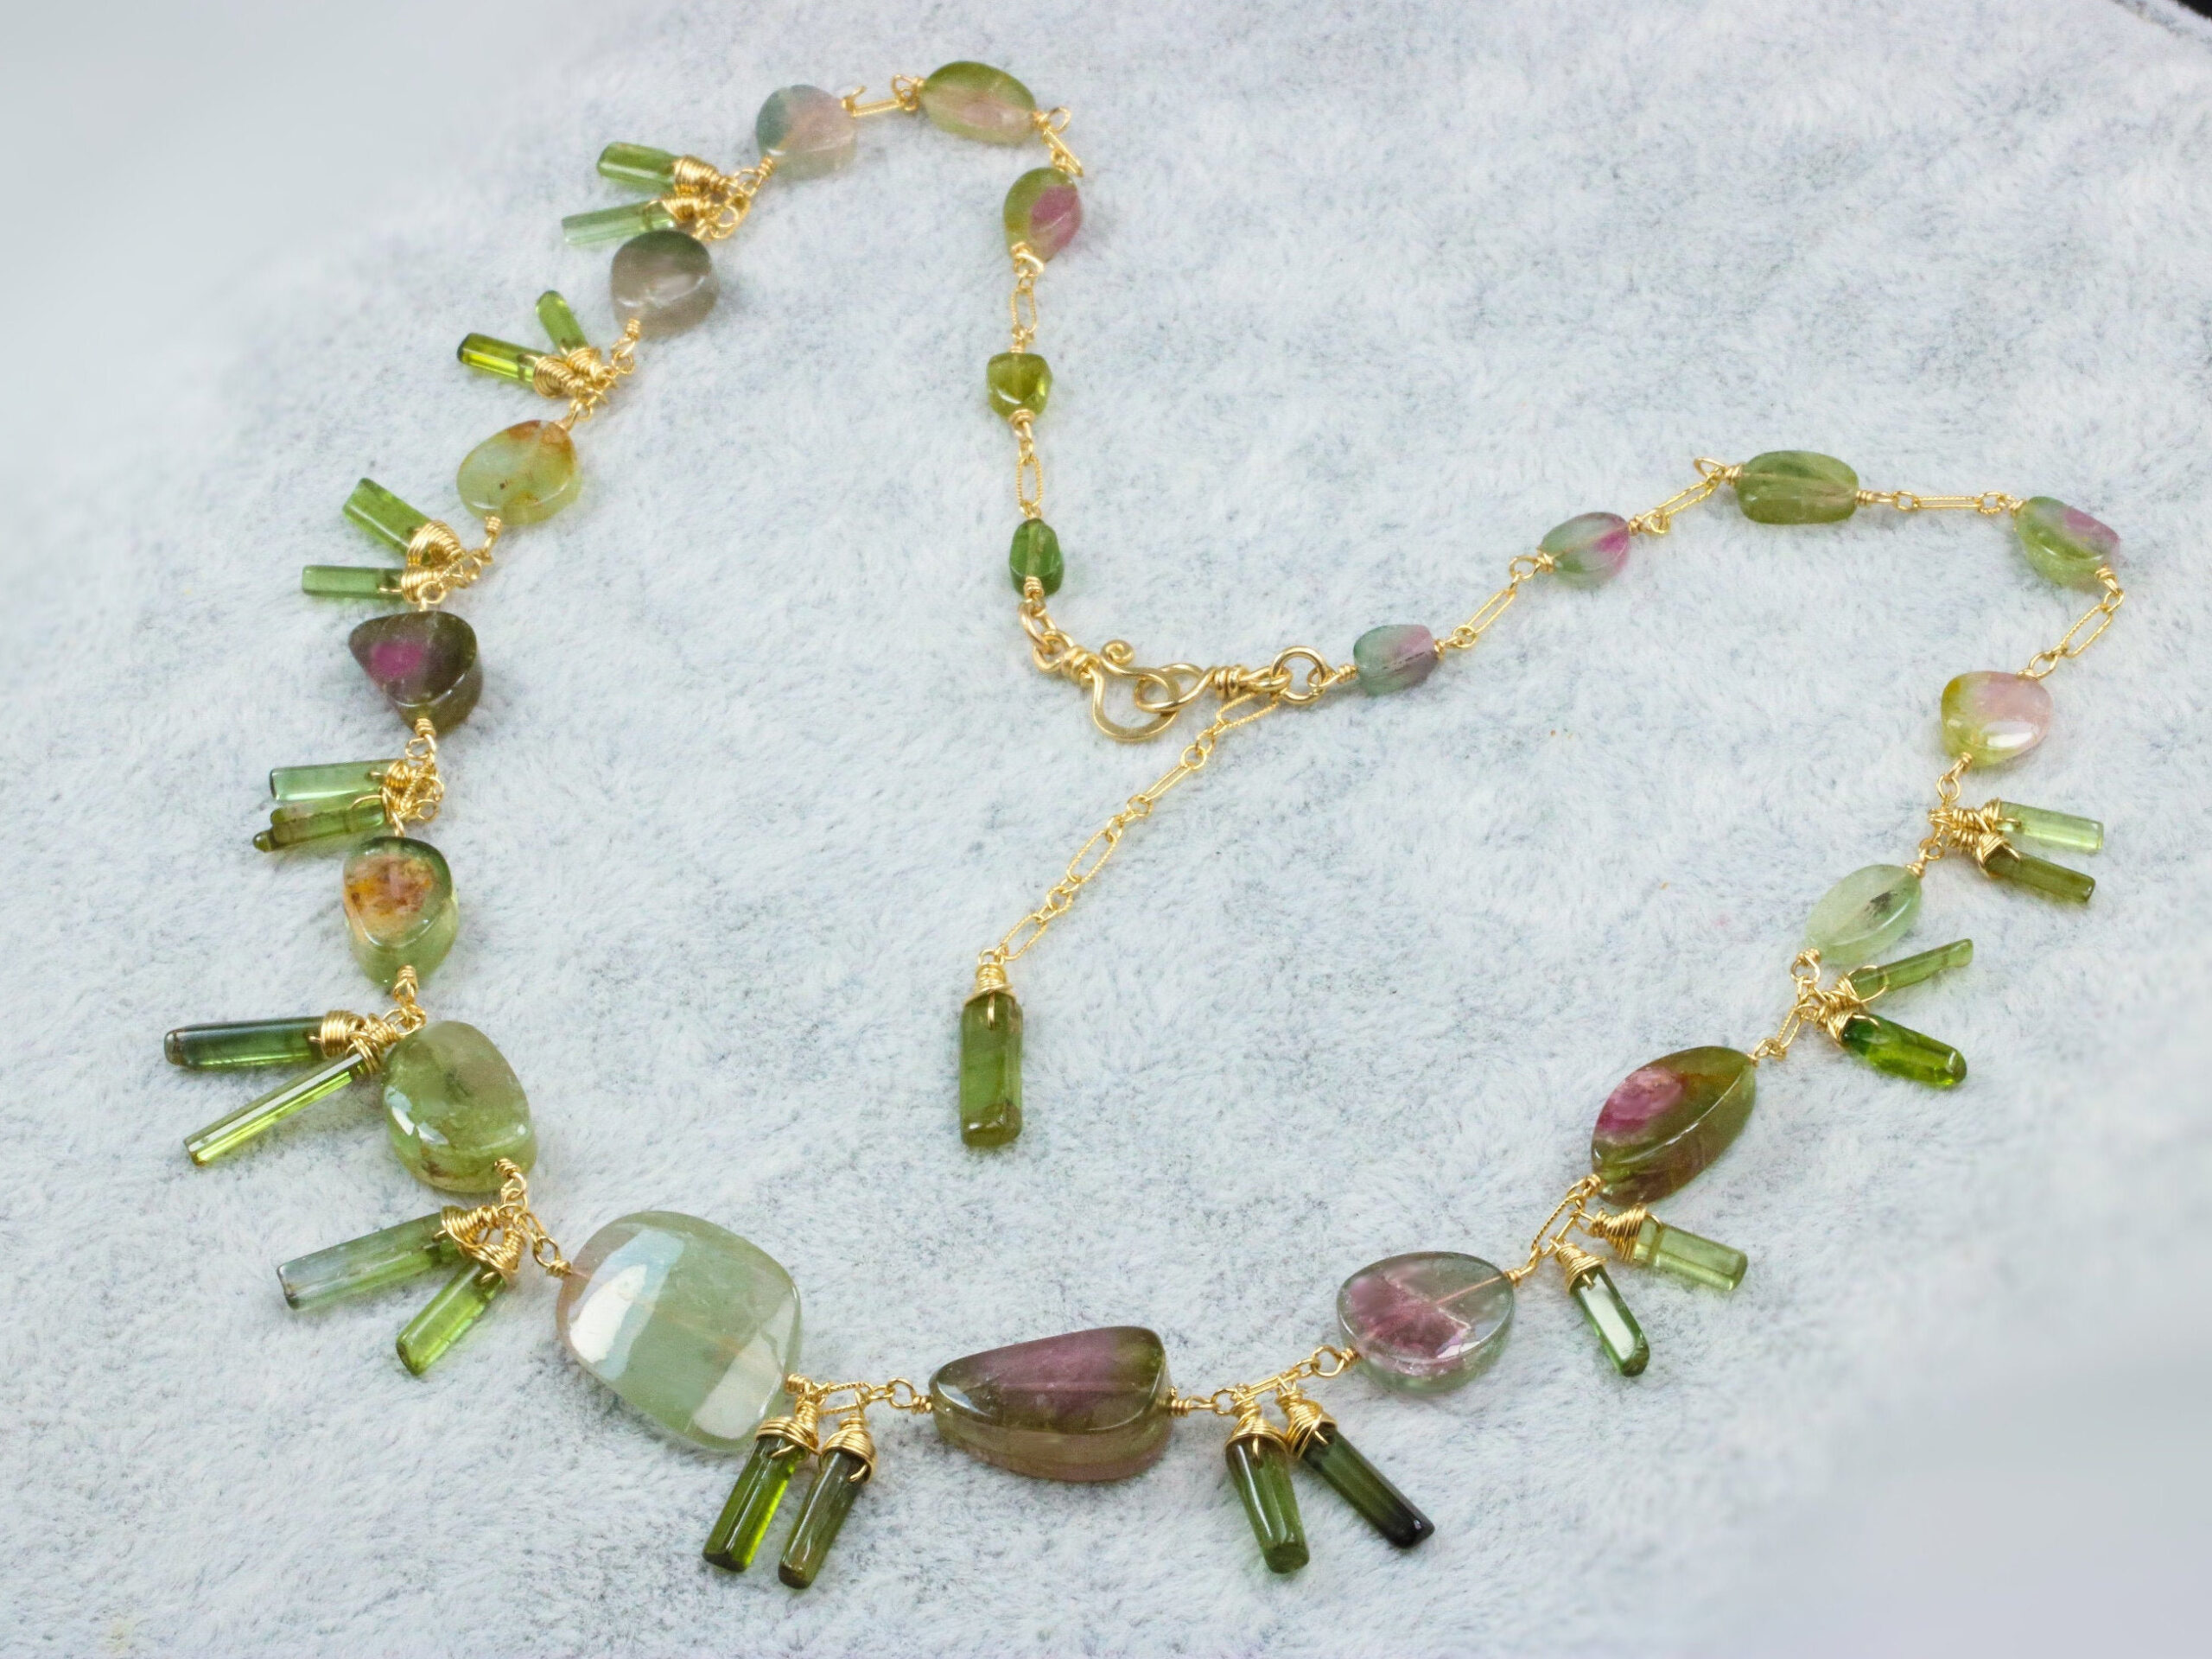 Watermelon Tourmaline Necklace in Gold Filled, Green Tourmaline Slice Necklace, One of a Kind